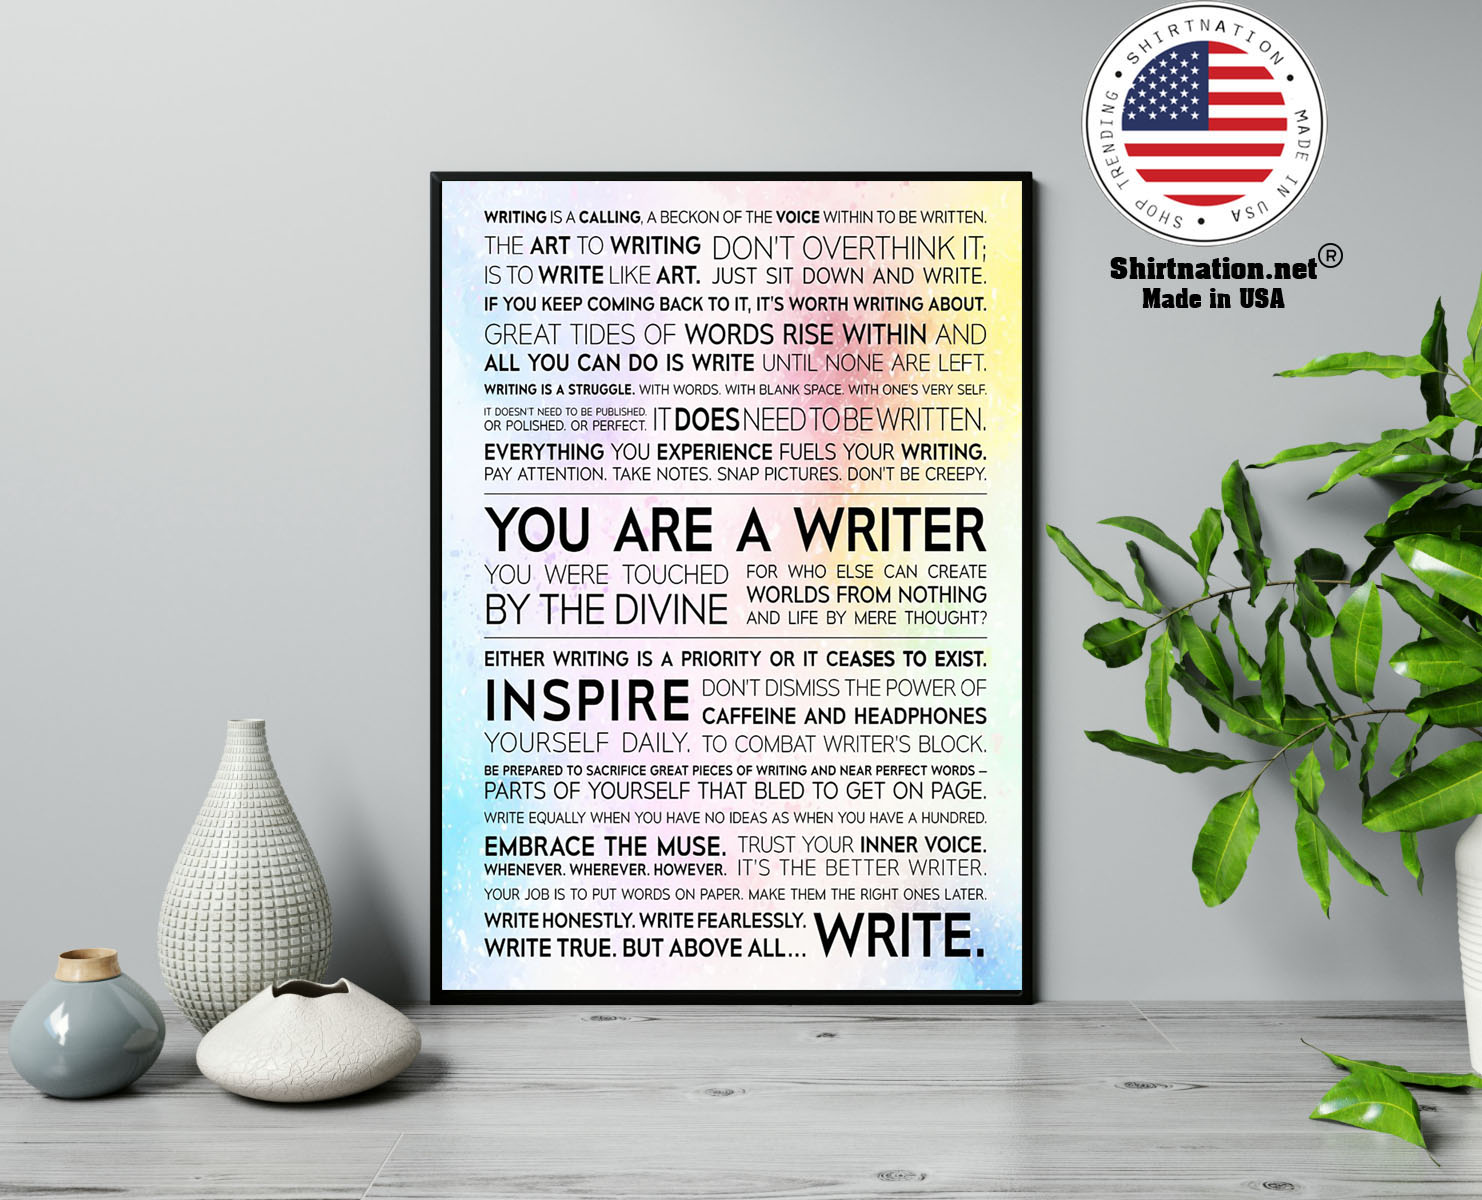 Writer Manifesto writing is a calling a beckon of the voice poster 13 1